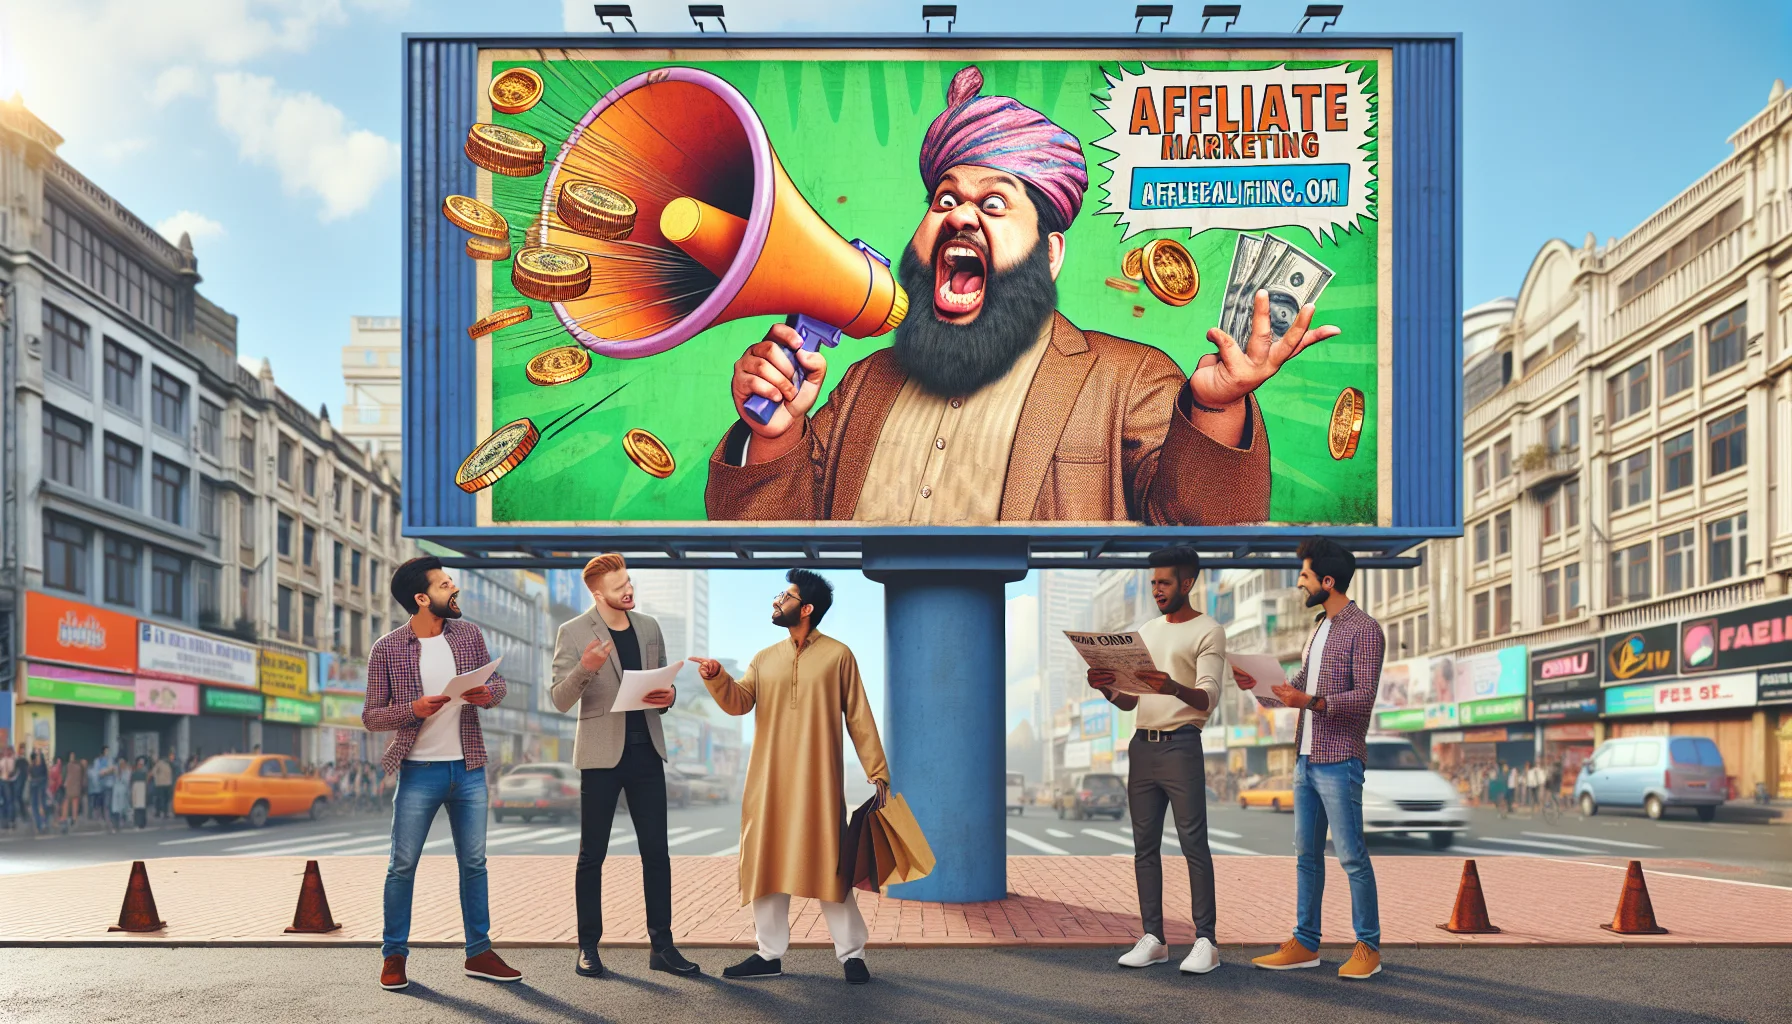 Create a humorous and realistic scene of a solo ad for affiliate marketing. Picture a South Asian merchant standing next to a large comical billboard in a bustling city center. The billboard displays a wild and exaggerated caricature of the merchant, with a giant megaphone, shouting out the benefits of their affiliate marketing services, generating passerby laughter. The caricature is tossing out golden coins and wrapped-up gifts (as symbols of the rewards earned from affiliate marketing services). Perhaps, a small group of diverse people pointing and chuckling at the billboard while the actual merchant, looking somewhat embarrassed yet amused, is giving out leaflets. Make sure to capture the spirit of affiliate marketing in a playful and light-hearted way.